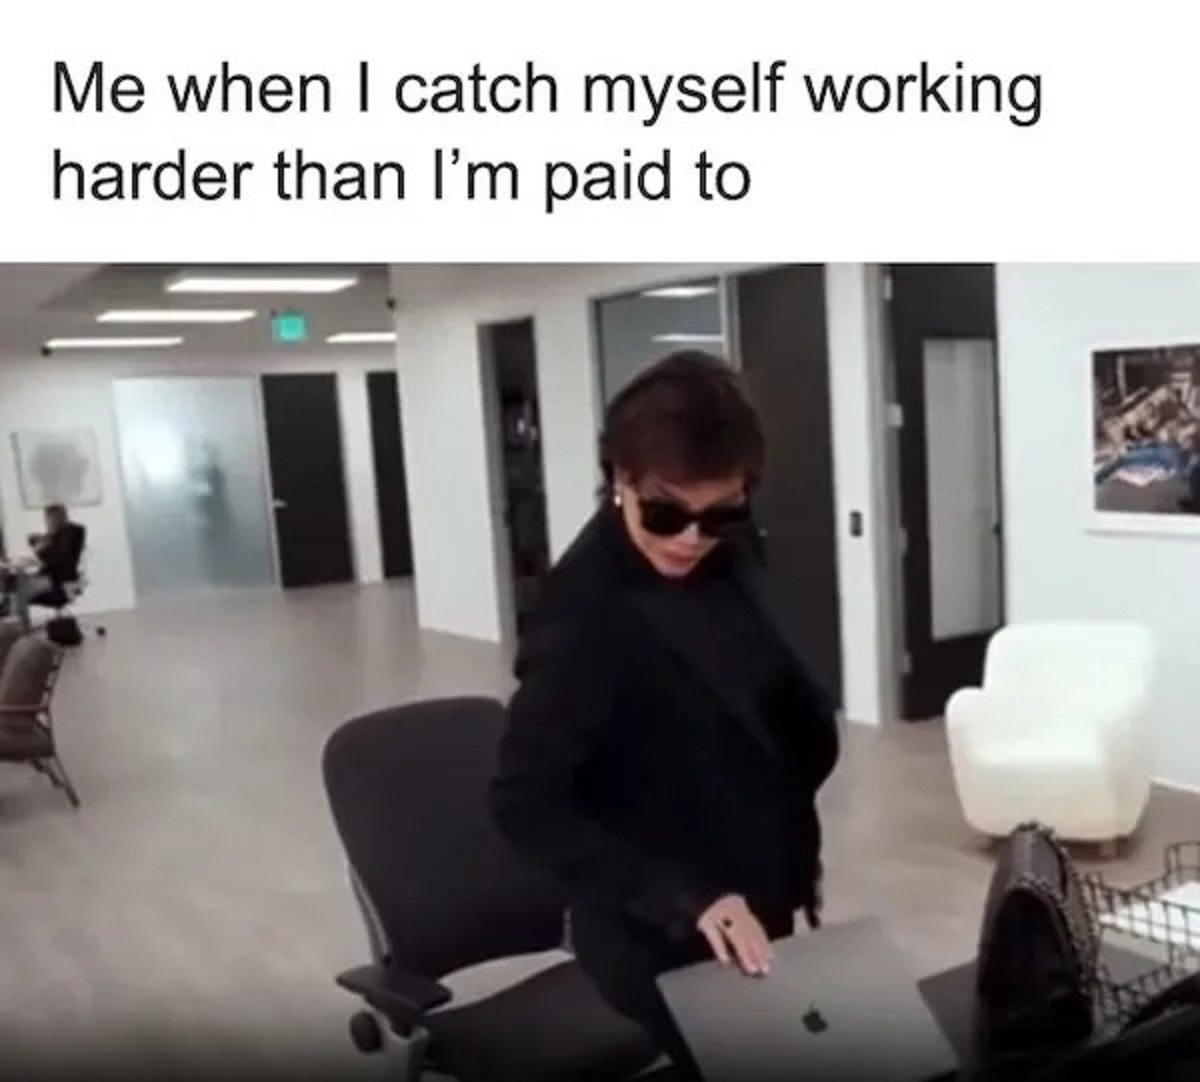 kris jenner closing laptop - Me when I catch myself working harder than I'm paid to